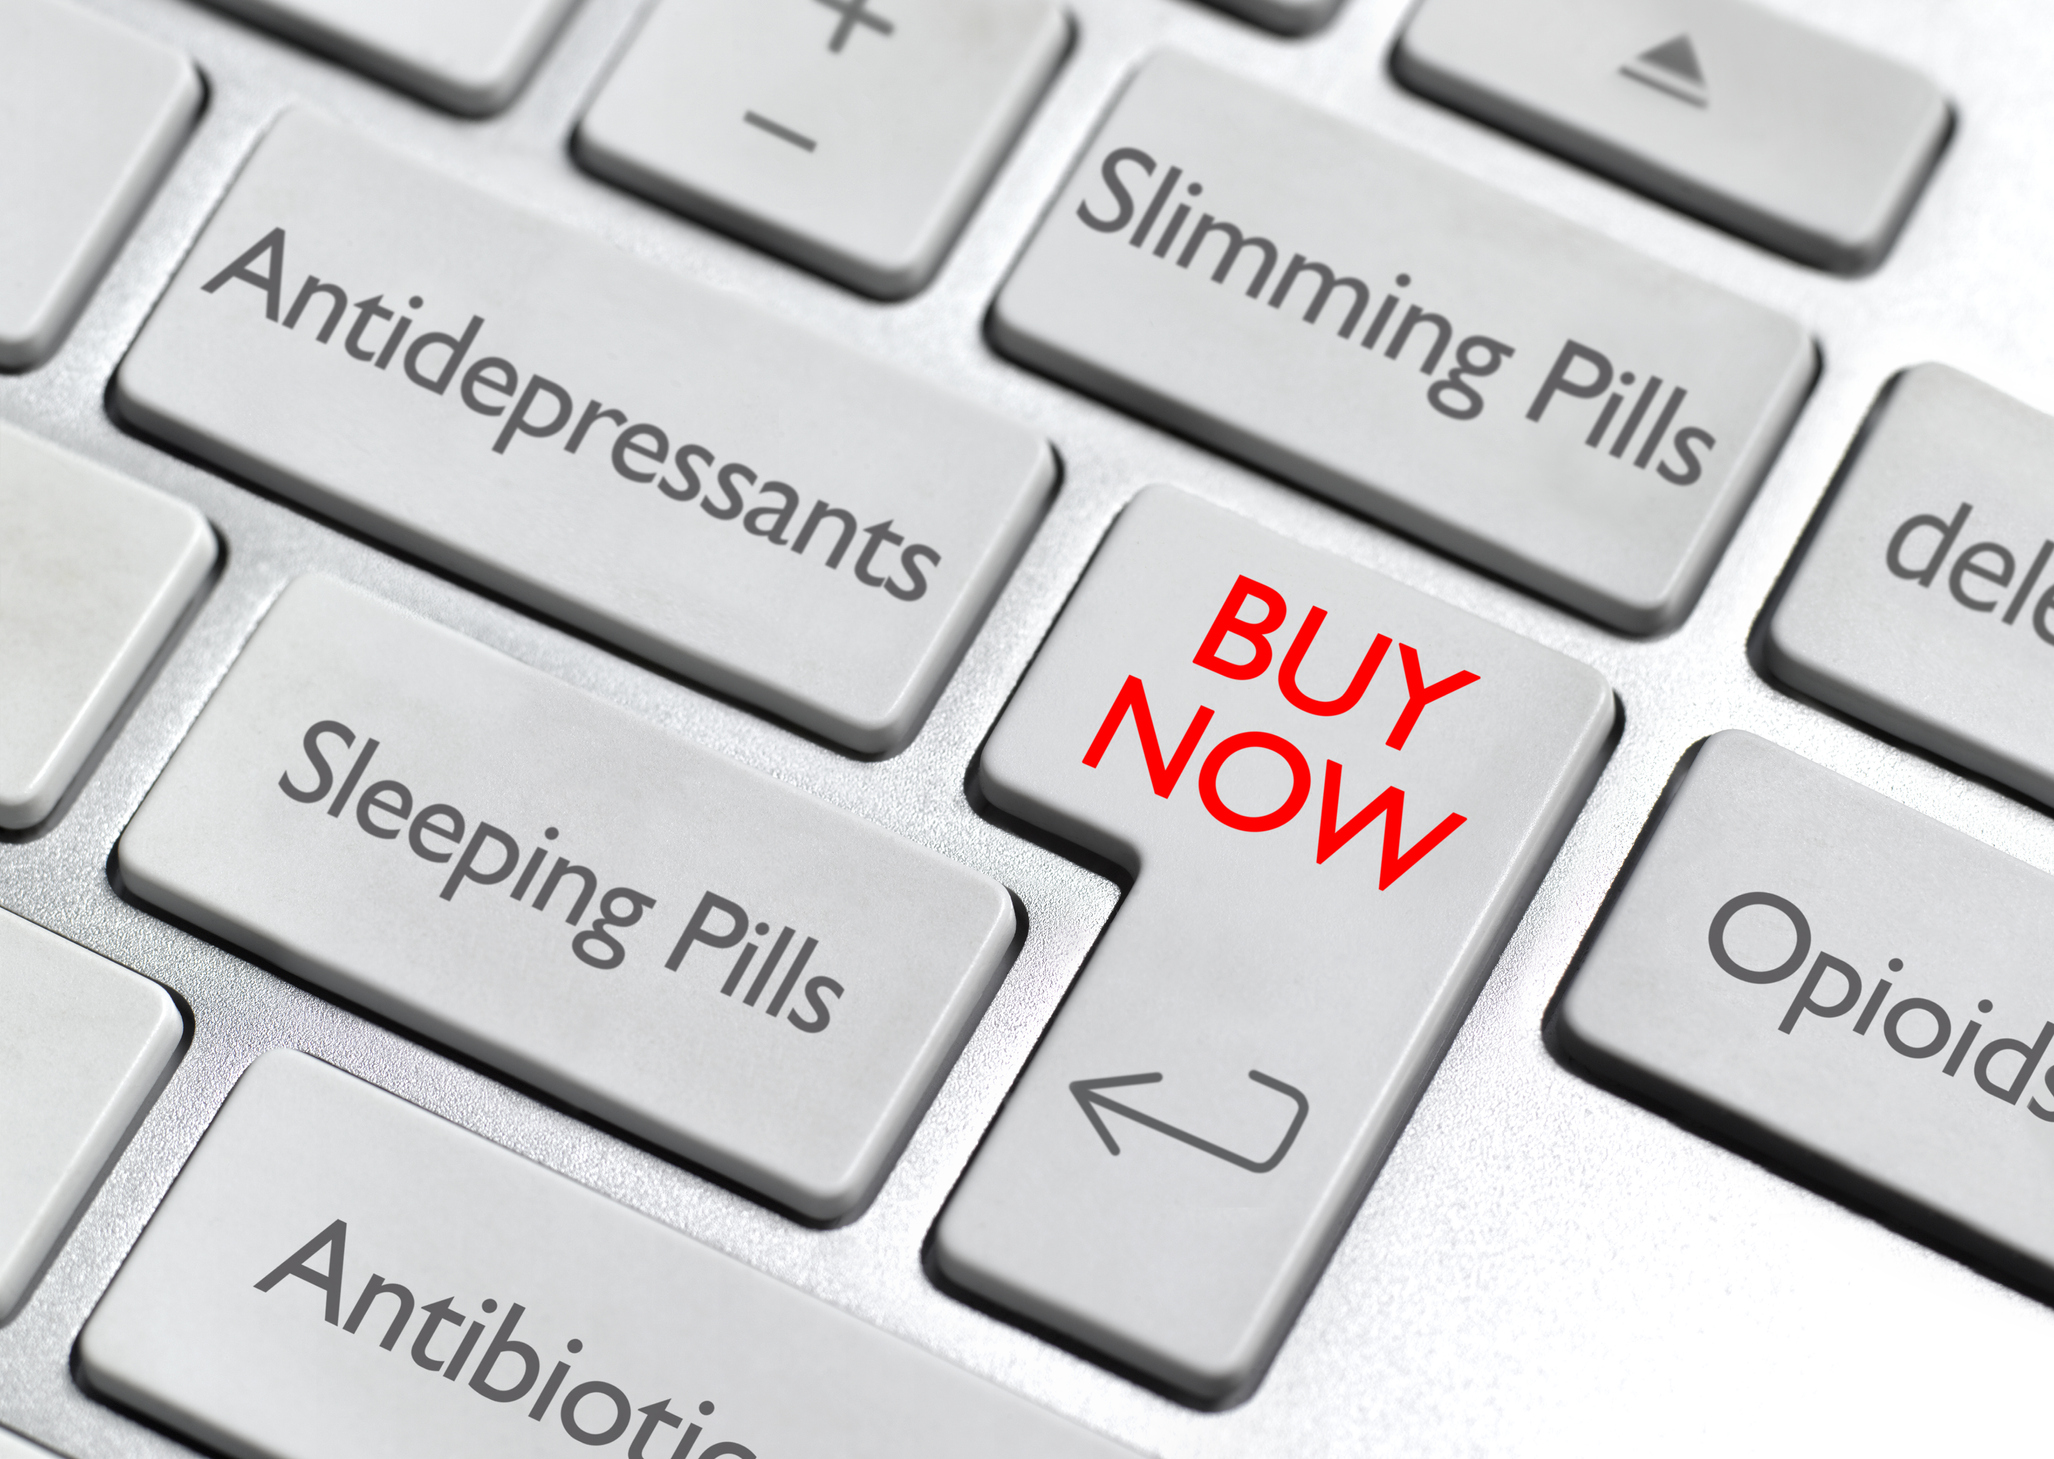 Keyboard with buttons for purchasing medications online